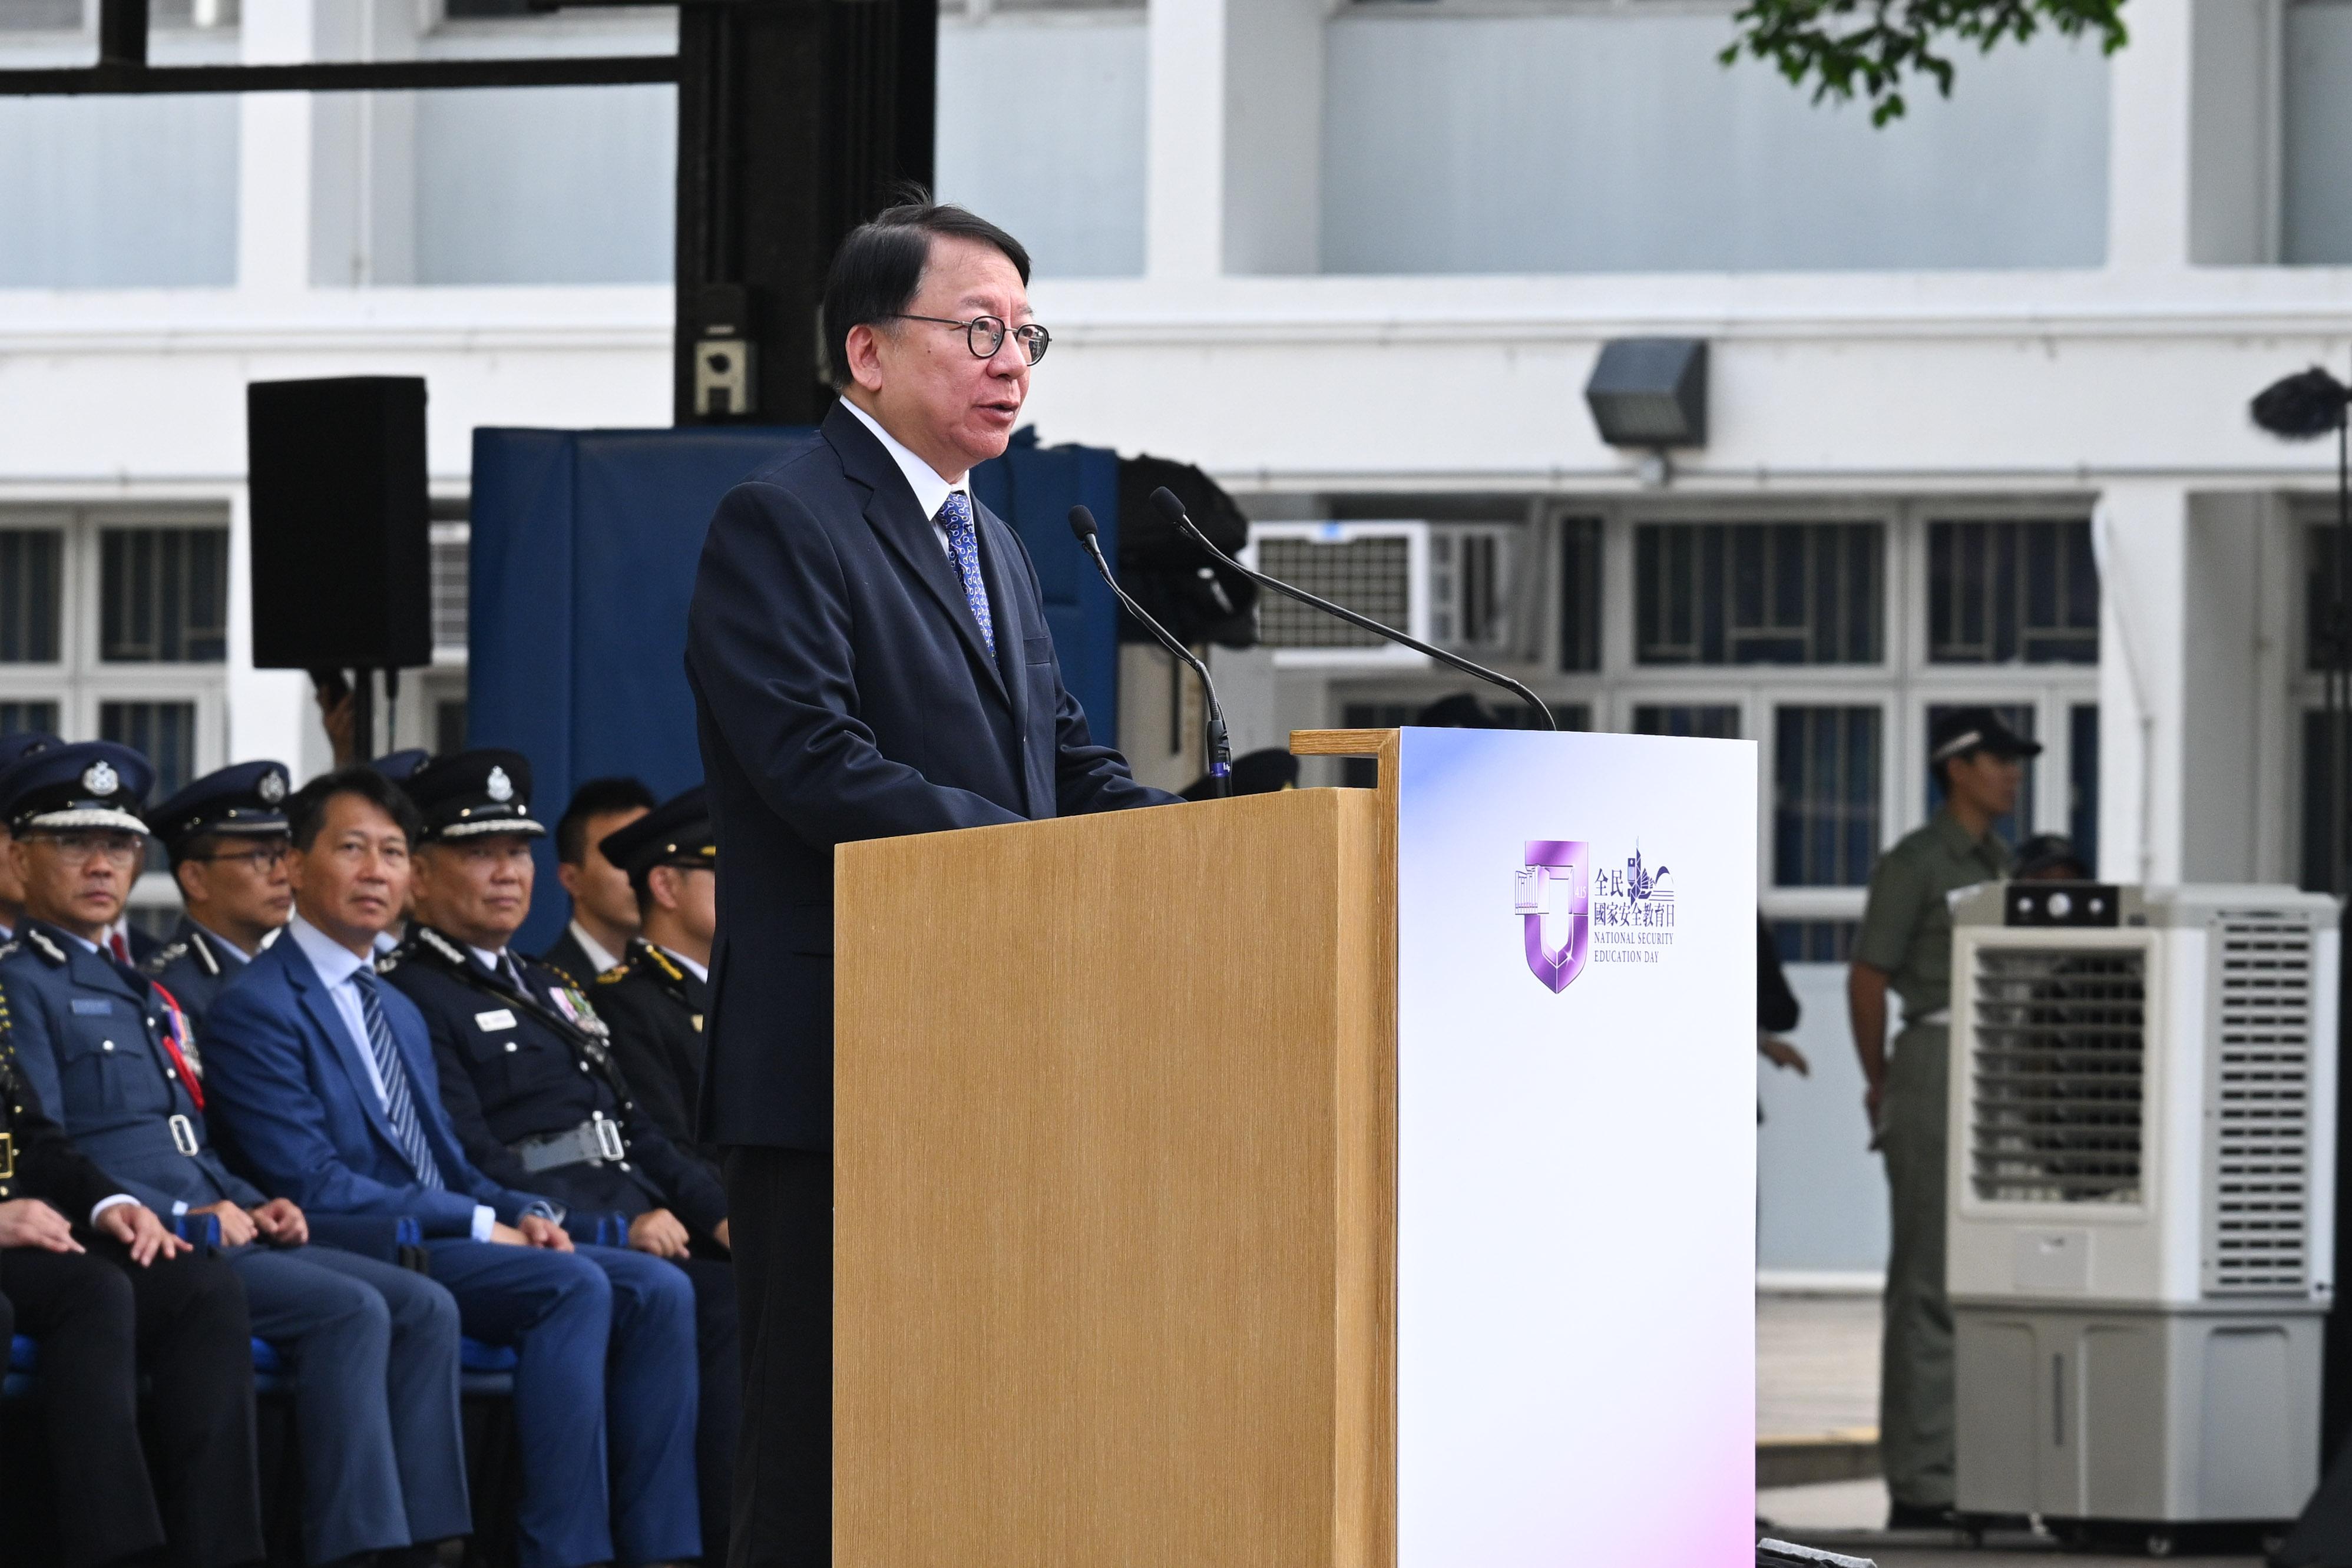 The Chief Secretary for Administration, Mr Chan Kwok-ki, speaks at the National Security Education Day flag raising ceremony today (April 15).